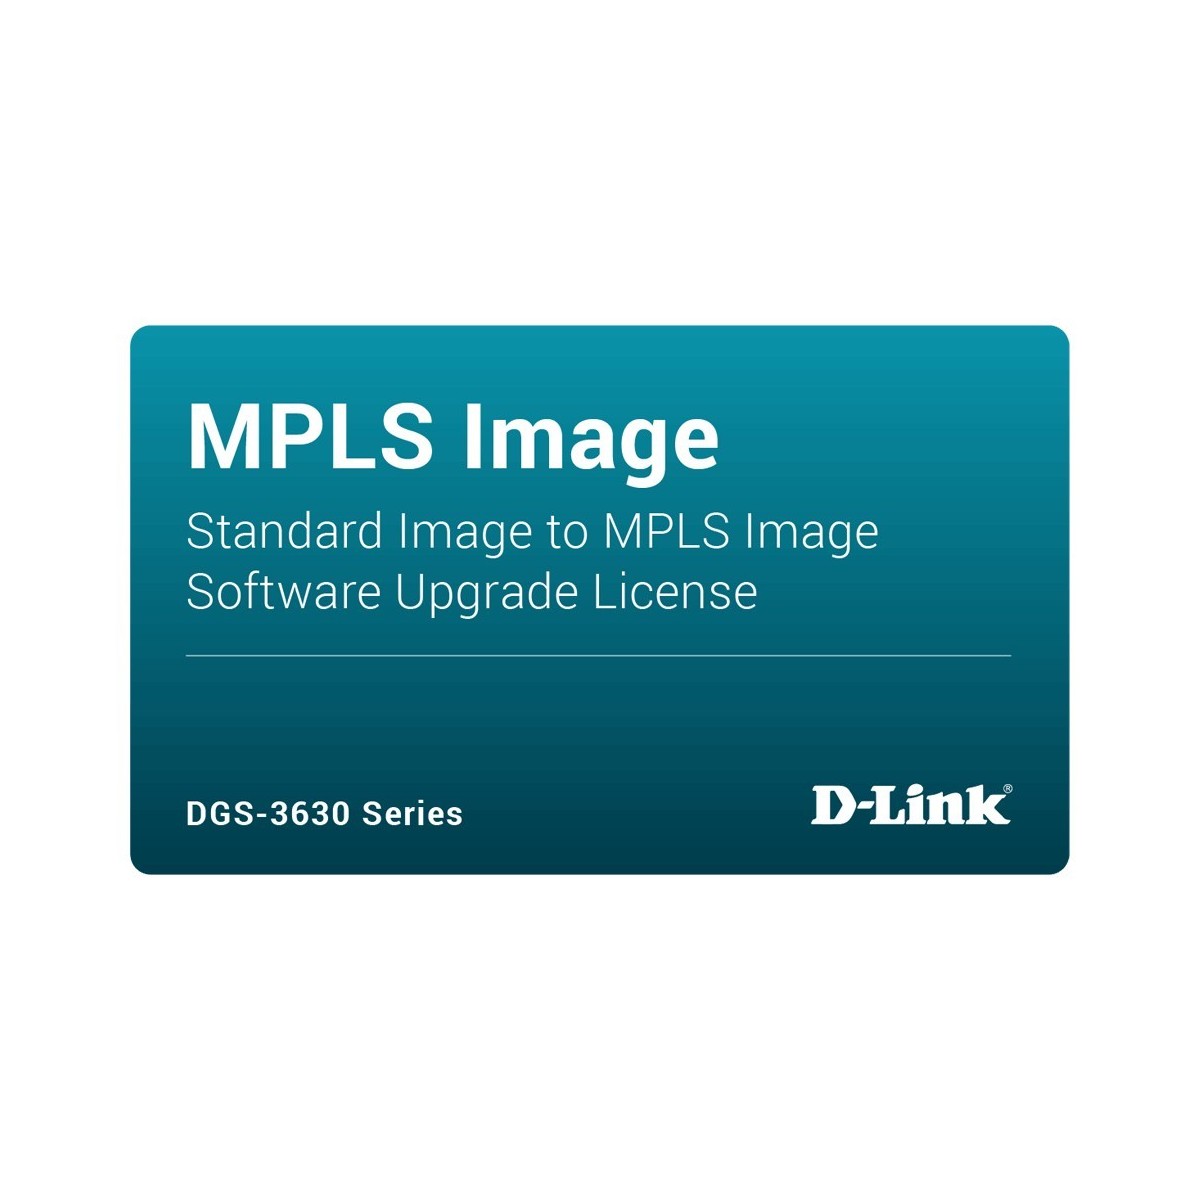 D-Link LICENSE DGS-3630-28SC-SM-LIC STANDARD TO MPLS IMAGE - 1 license(s) - Full - Upgrade